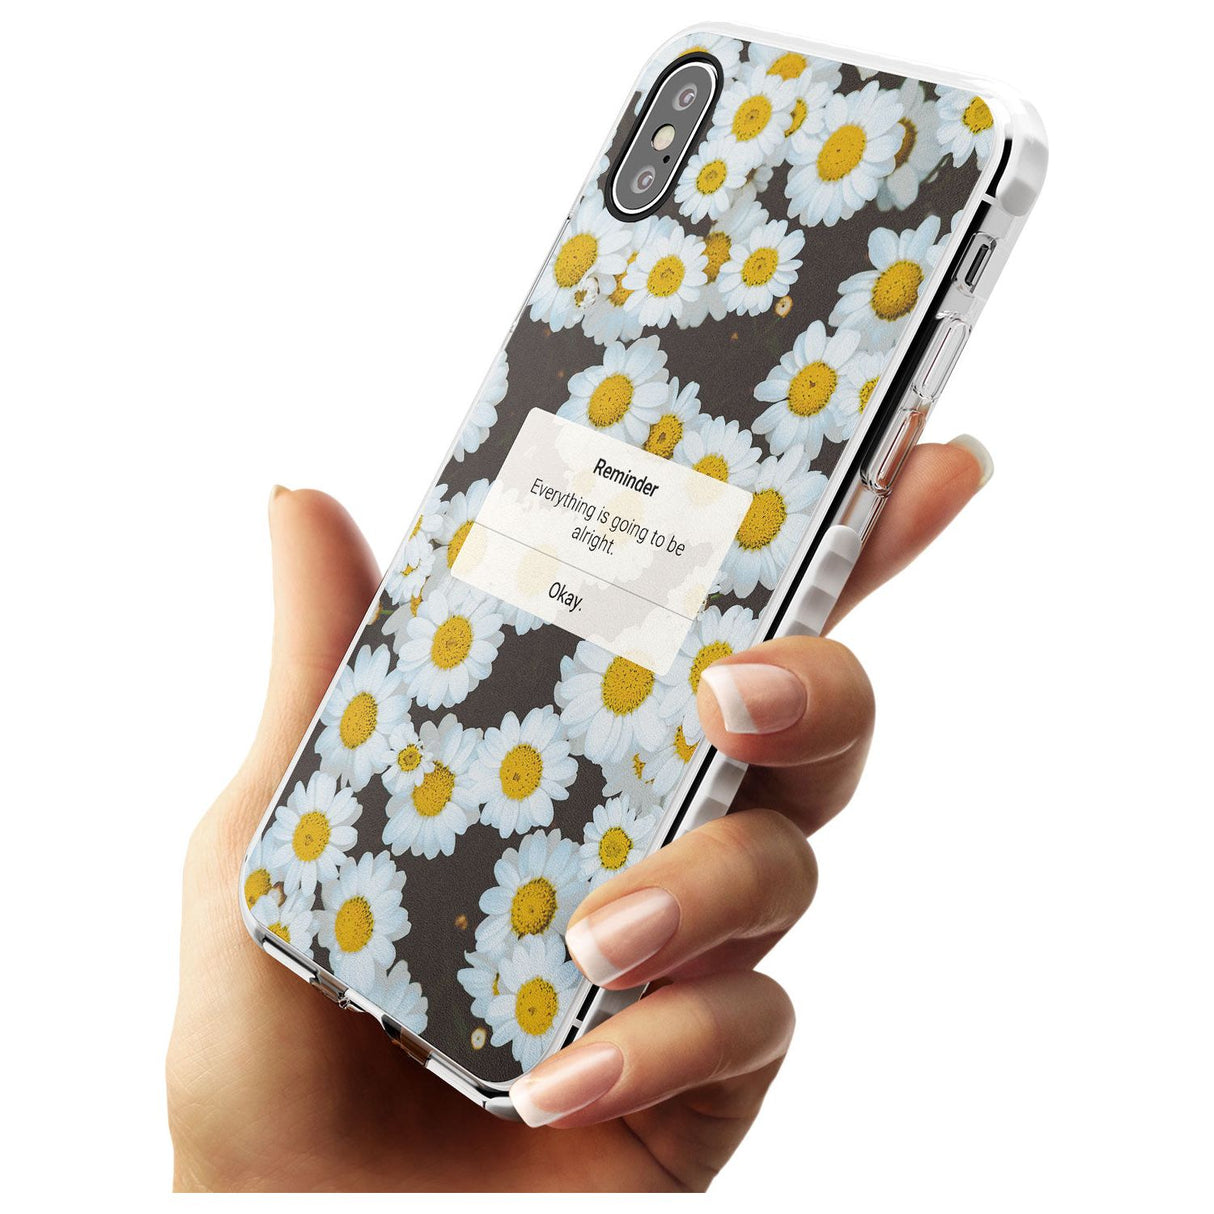 "Everything will be alright" iPhone Reminder Slim TPU Phone Case Warehouse X XS Max XR